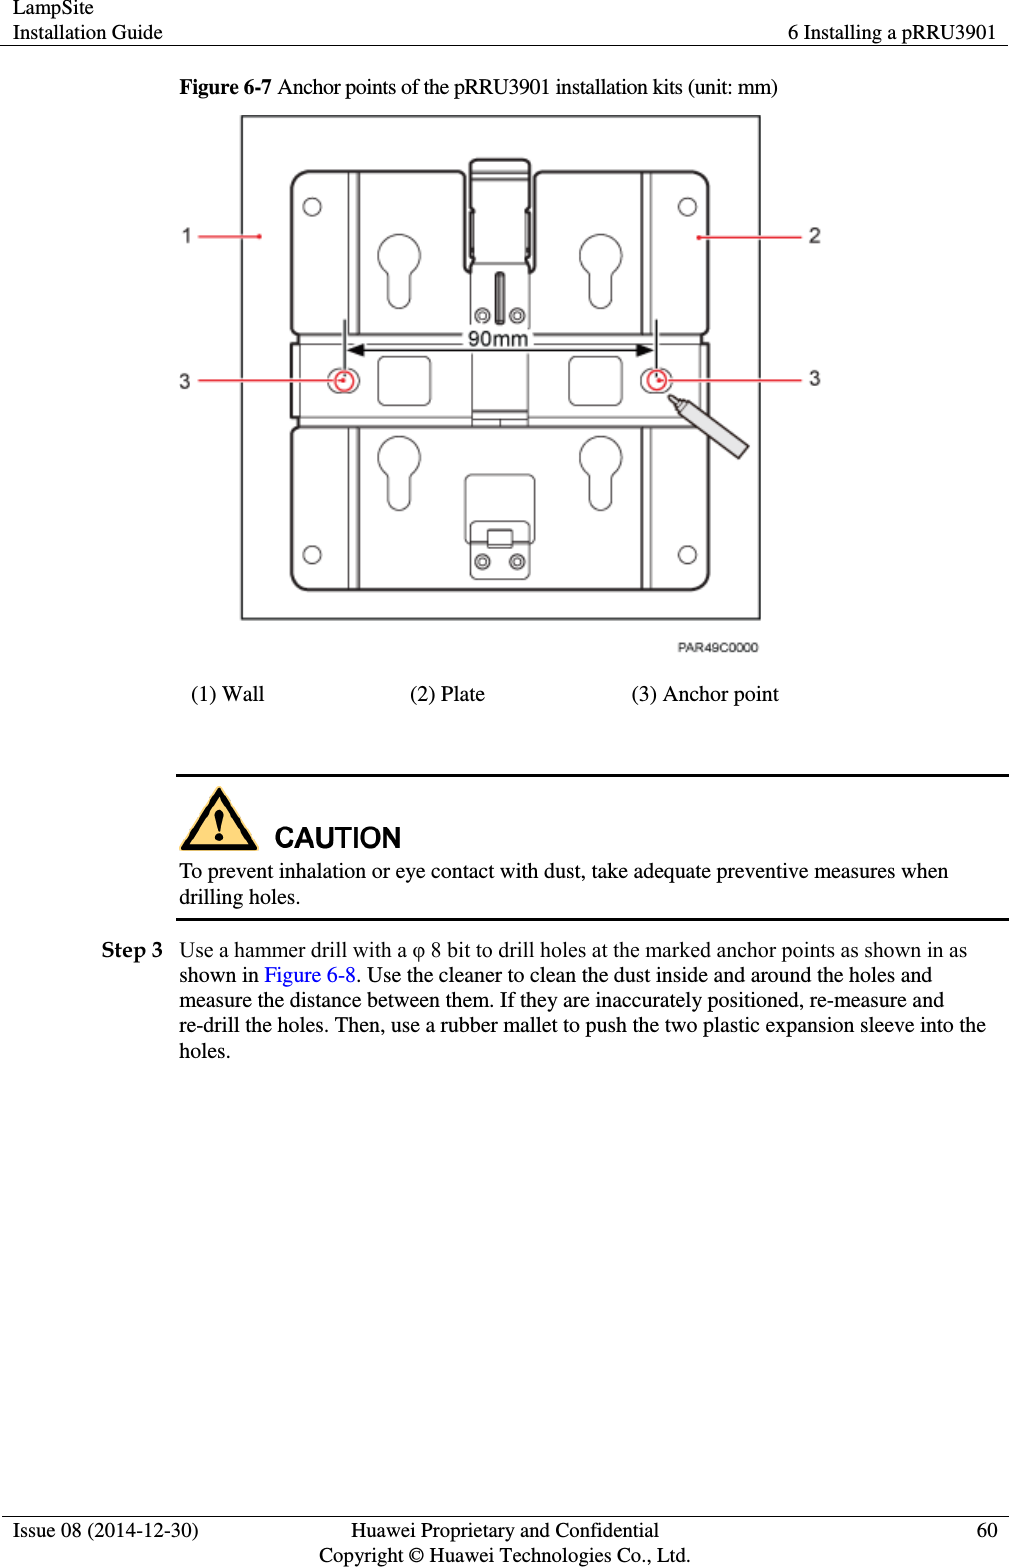 LampSite Installation Guide 6 Installing a pRRU3901  Issue 08 (2014-12-30) Huawei Proprietary and Confidential                                     Copyright © Huawei Technologies Co., Ltd. 60  Figure 6-7 Anchor points of the pRRU3901 installation kits (unit: mm)  (1) Wall (2) Plate (3) Anchor point   To prevent inhalation or eye contact with dust, take adequate preventive measures when drilling holes. Step 3 Use a hammer drill with a φ 8 bit to drill holes at the marked anchor points as shown in as shown in Figure 6-8. Use the cleaner to clean the dust inside and around the holes and measure the distance between them. If they are inaccurately positioned, re-measure and re-drill the holes. Then, use a rubber mallet to push the two plastic expansion sleeve into the holes. 